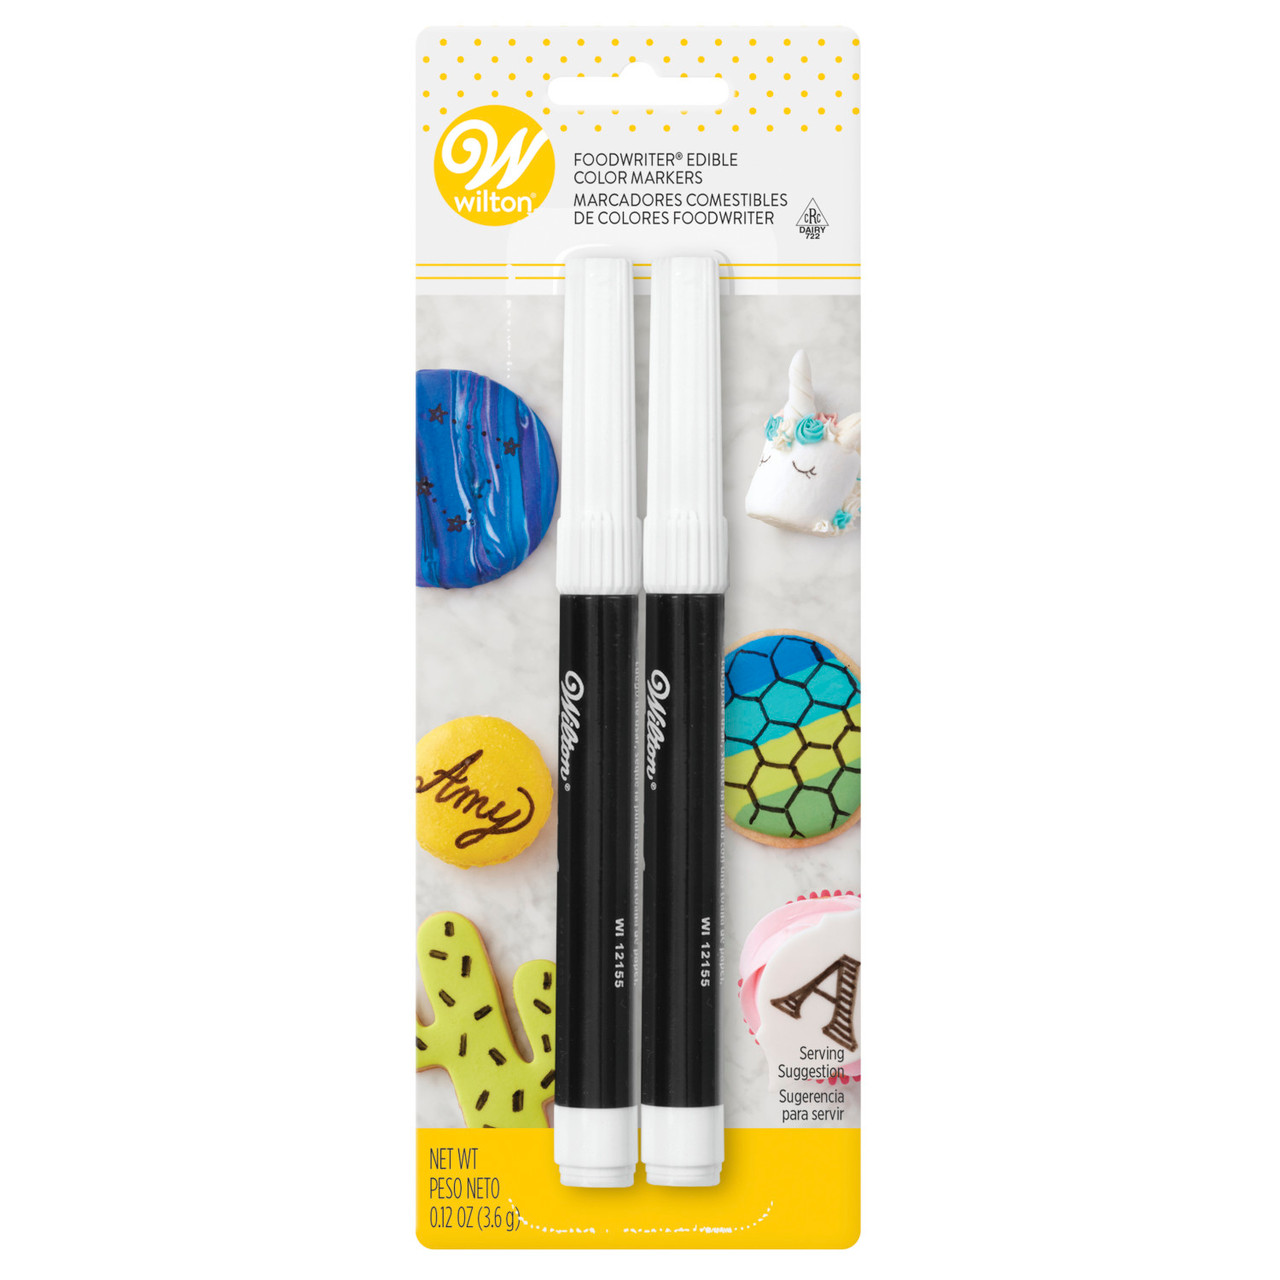 Wilton Foodwriter Edible Color Markers - Shop Icing & Decorations